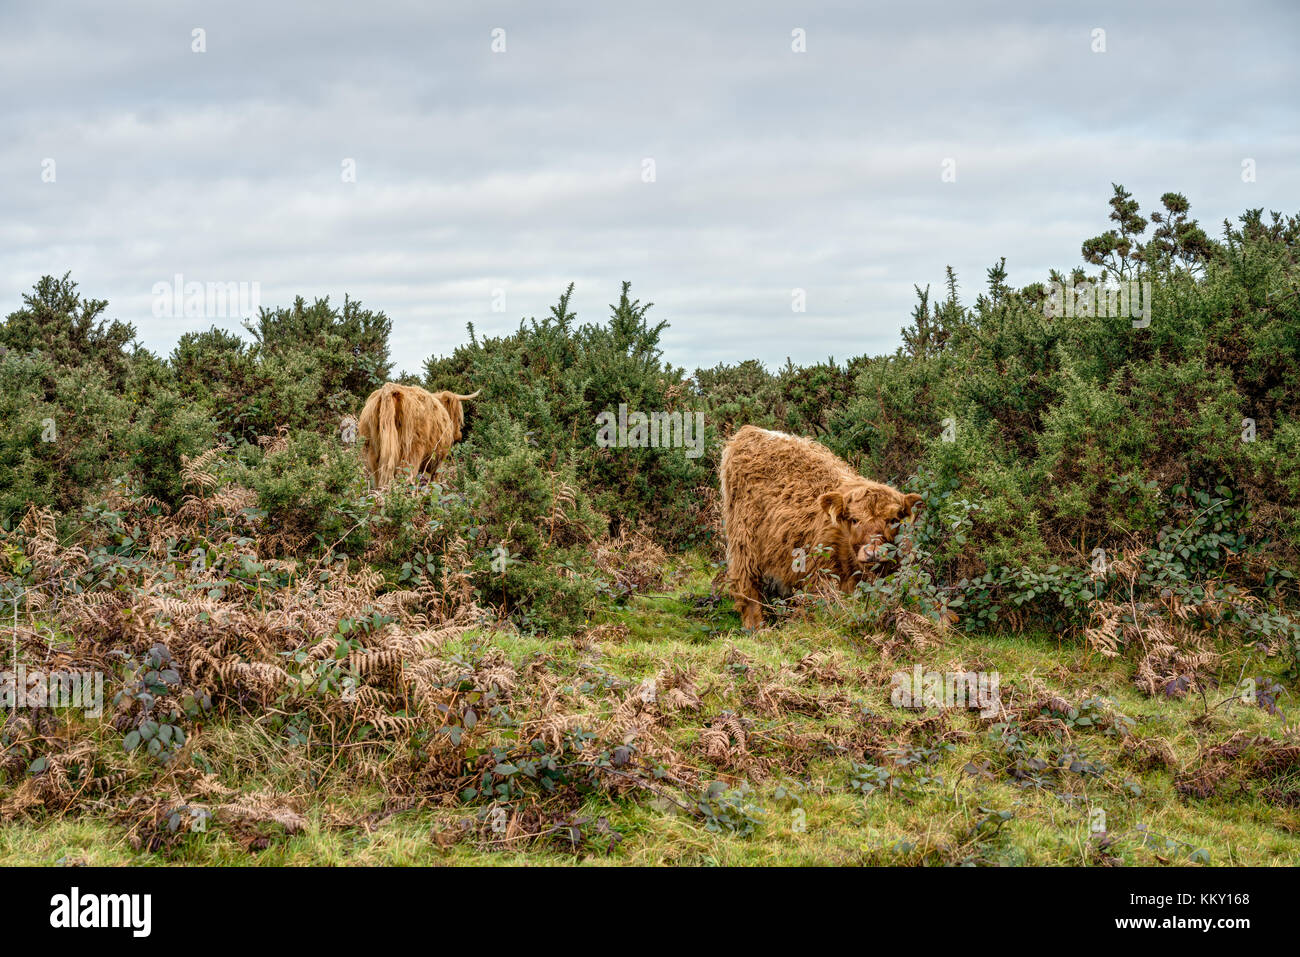 A rural scene of two Scottish Highland Cattle grazing amongst dense gorse bushes on the Downs, the calf looking into the camera, mother close by. Stock Photo